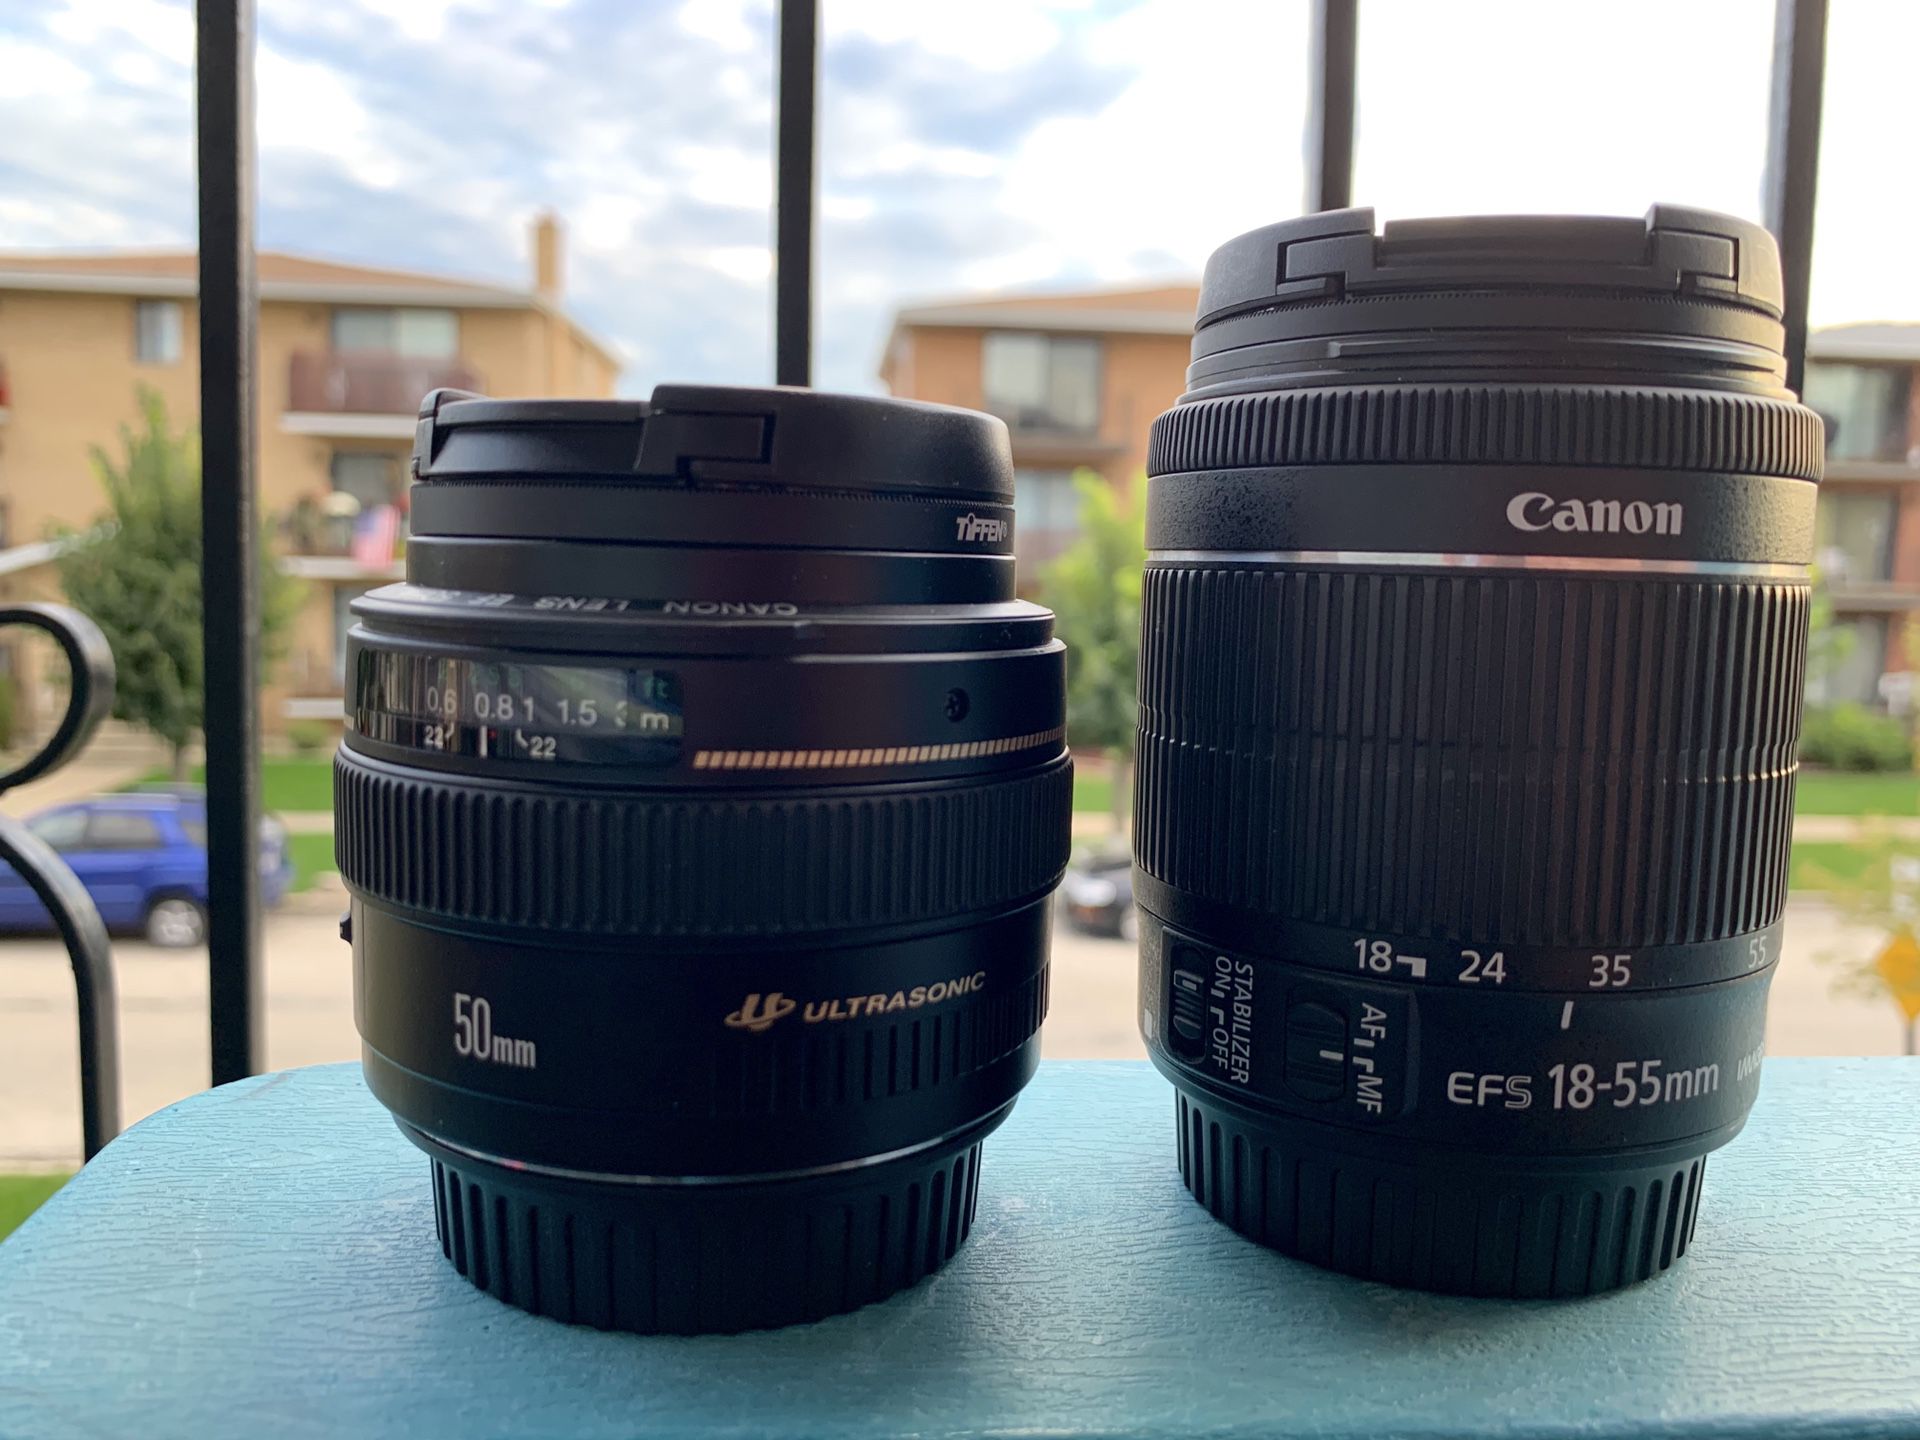 Canon 50mm f1.4 & 18-55mm f3.5 - 5.6